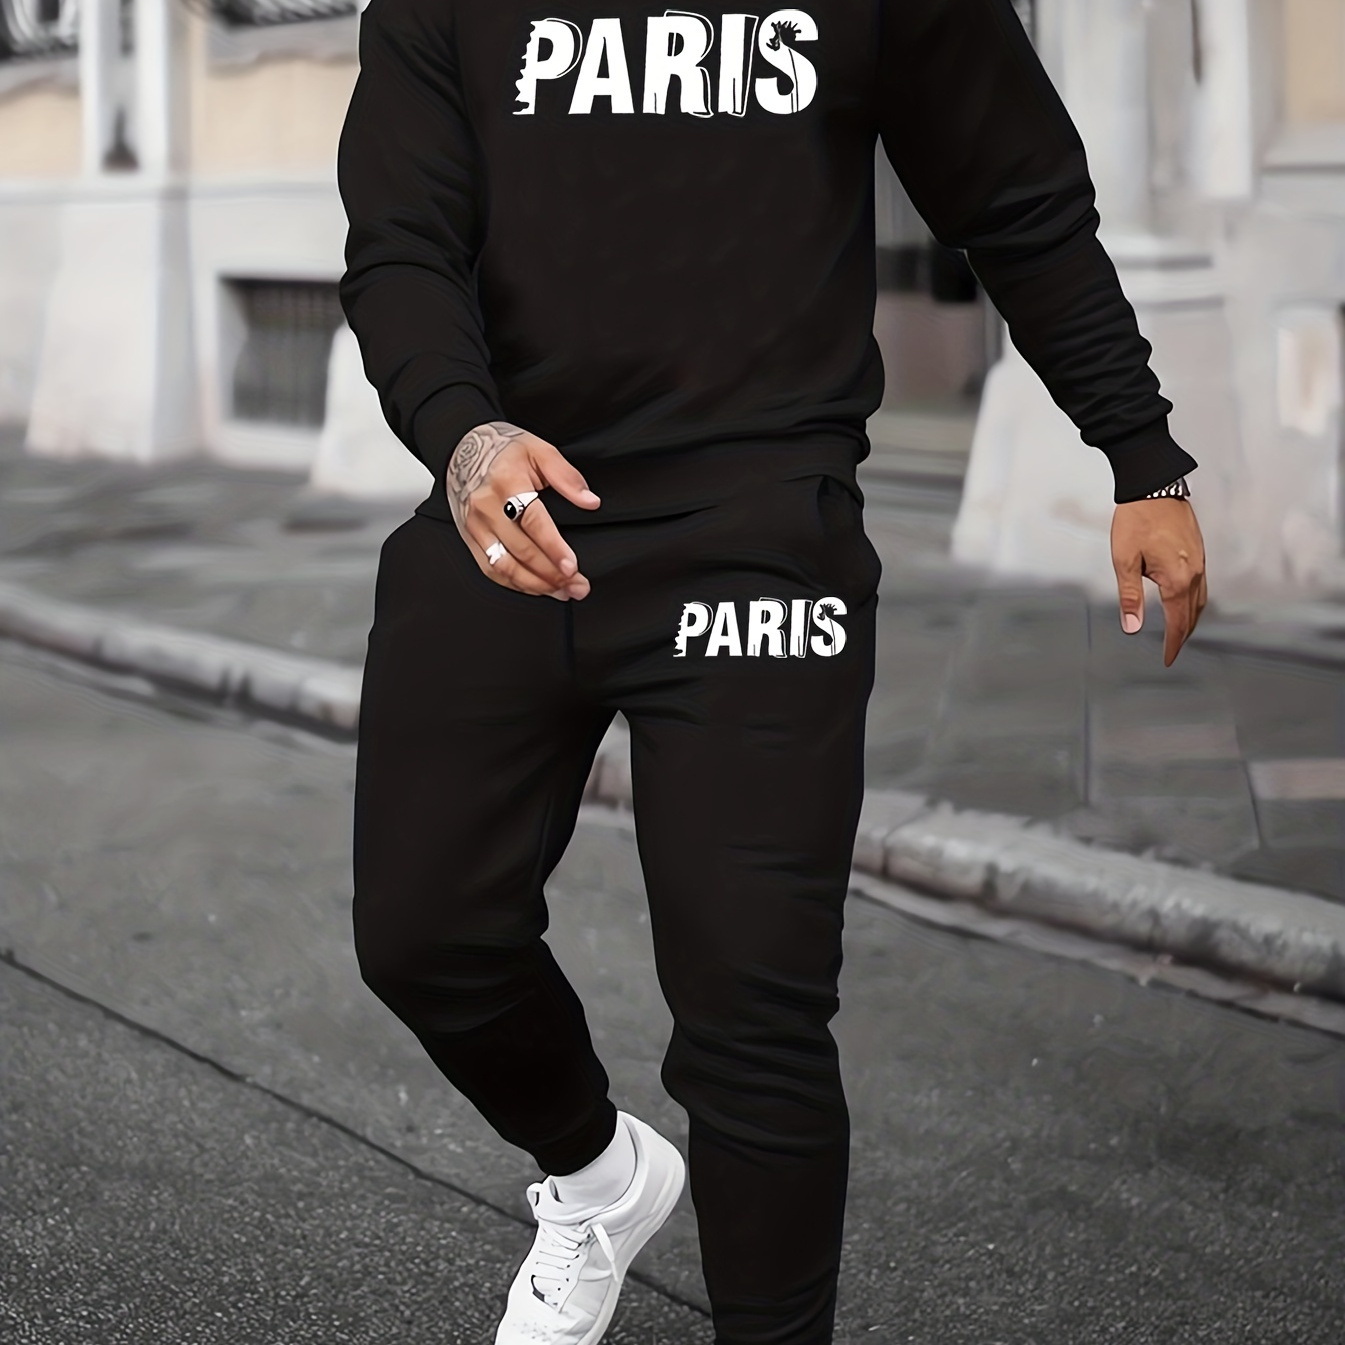 

Paris Pattern Print Two-piece Set, Men's Long Sleeve Crew Neck Street Casual Sports And Fashionable Pullover Sweatshirt, Elastic Drawstring Sweatpants, For Outdoor Sports, For Fall Winter